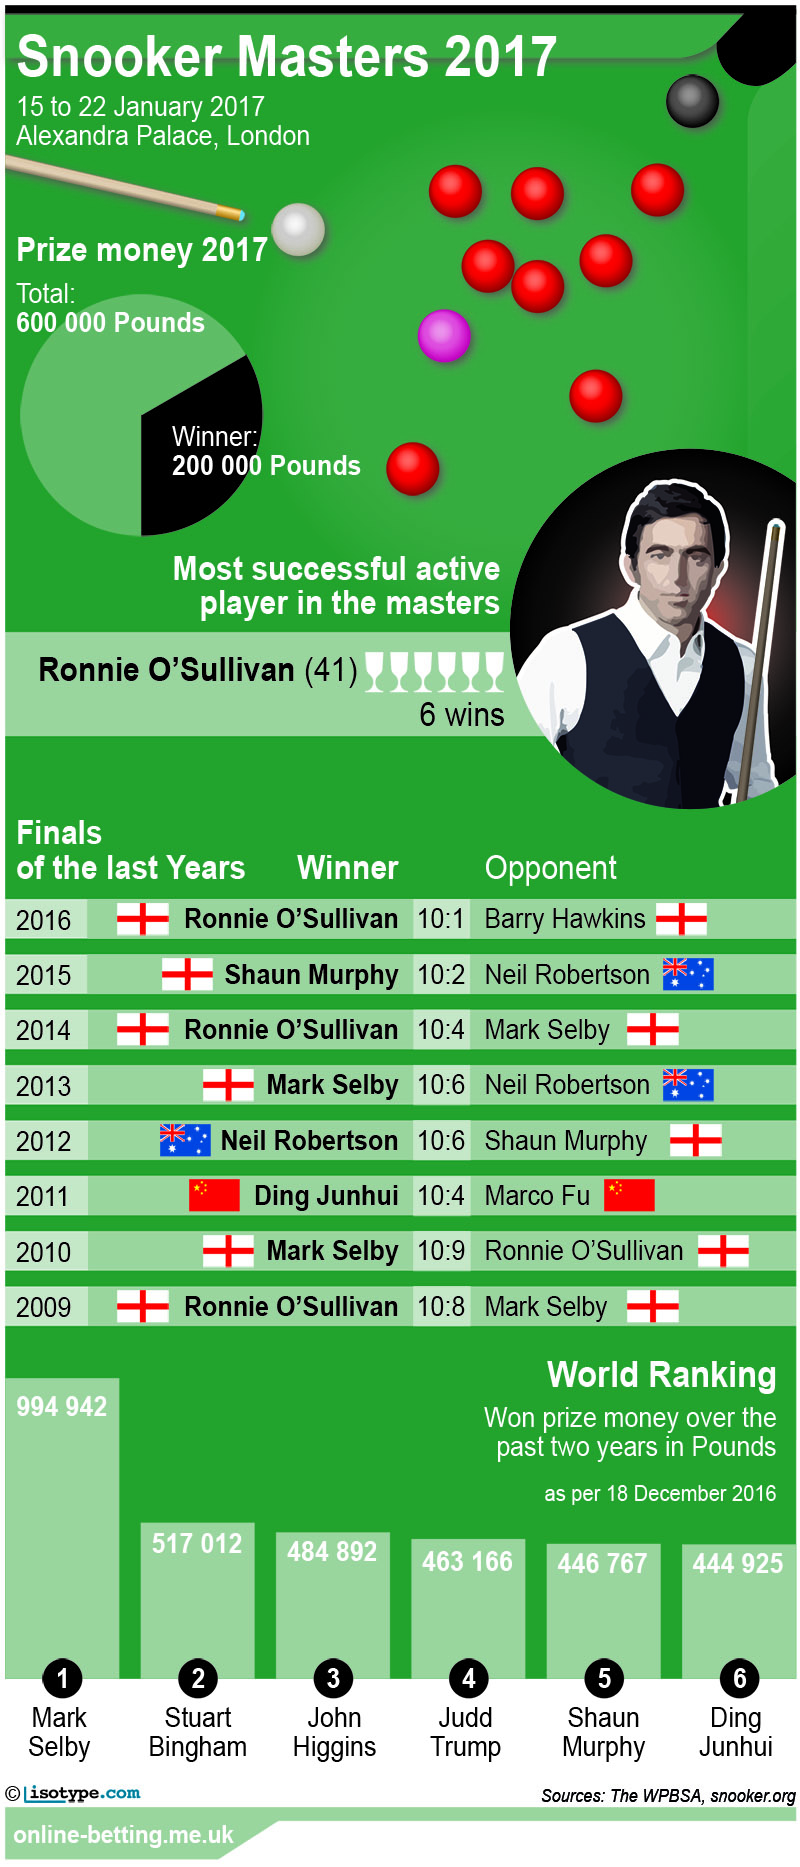 Snooker Masters 2017 Infographic